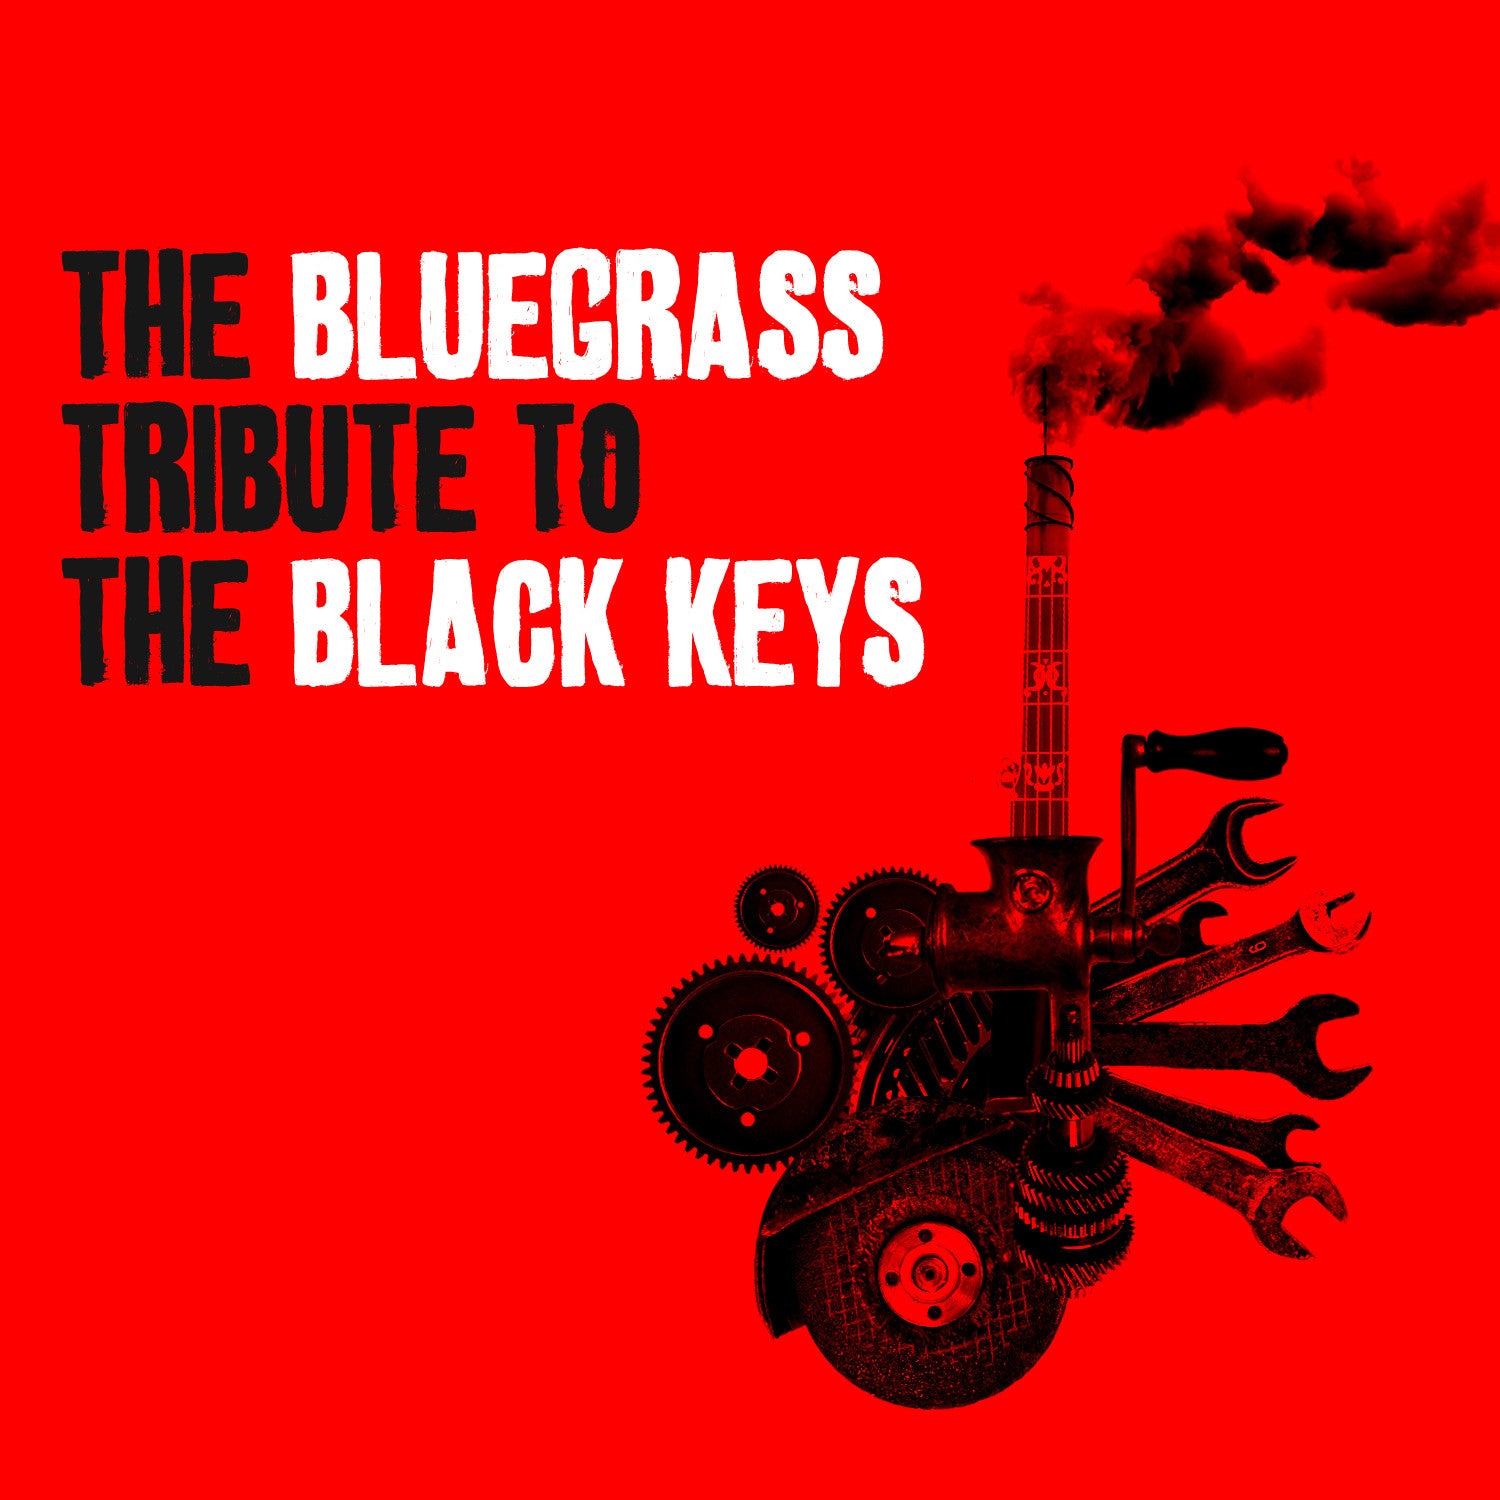 The Bluegrass Tribute to The Black Keys